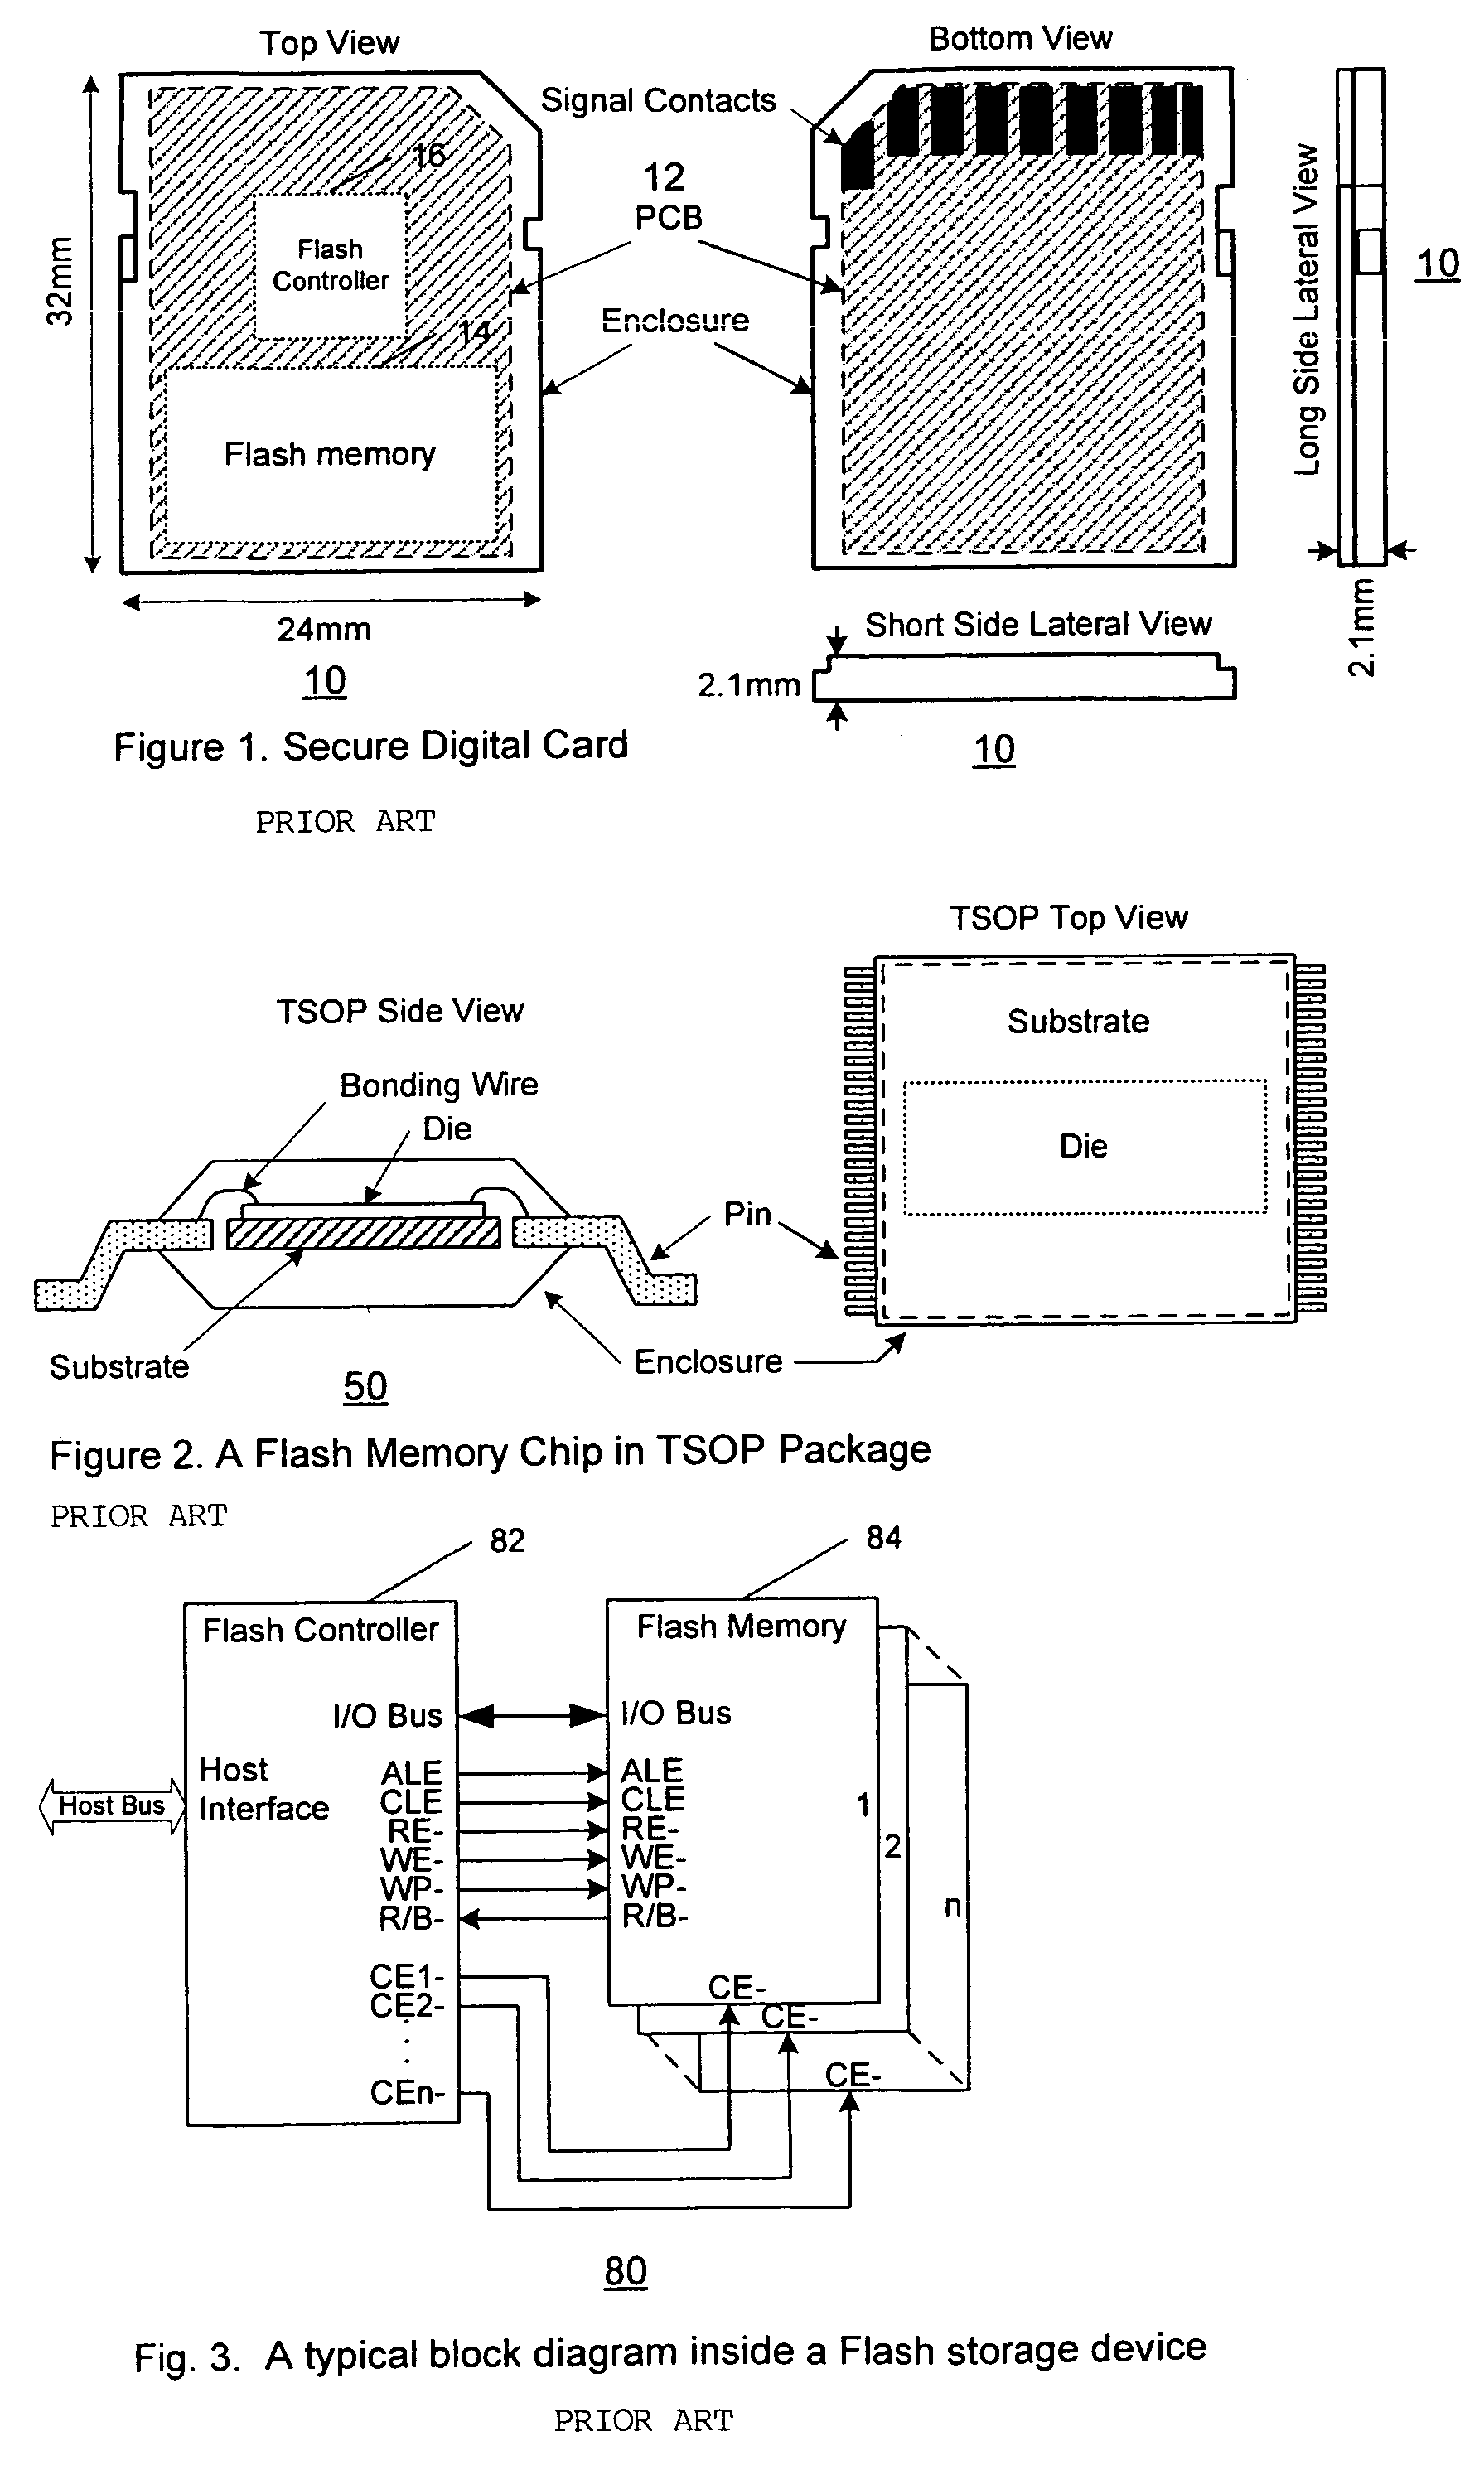 Method and system for expanding flash storage device capacity